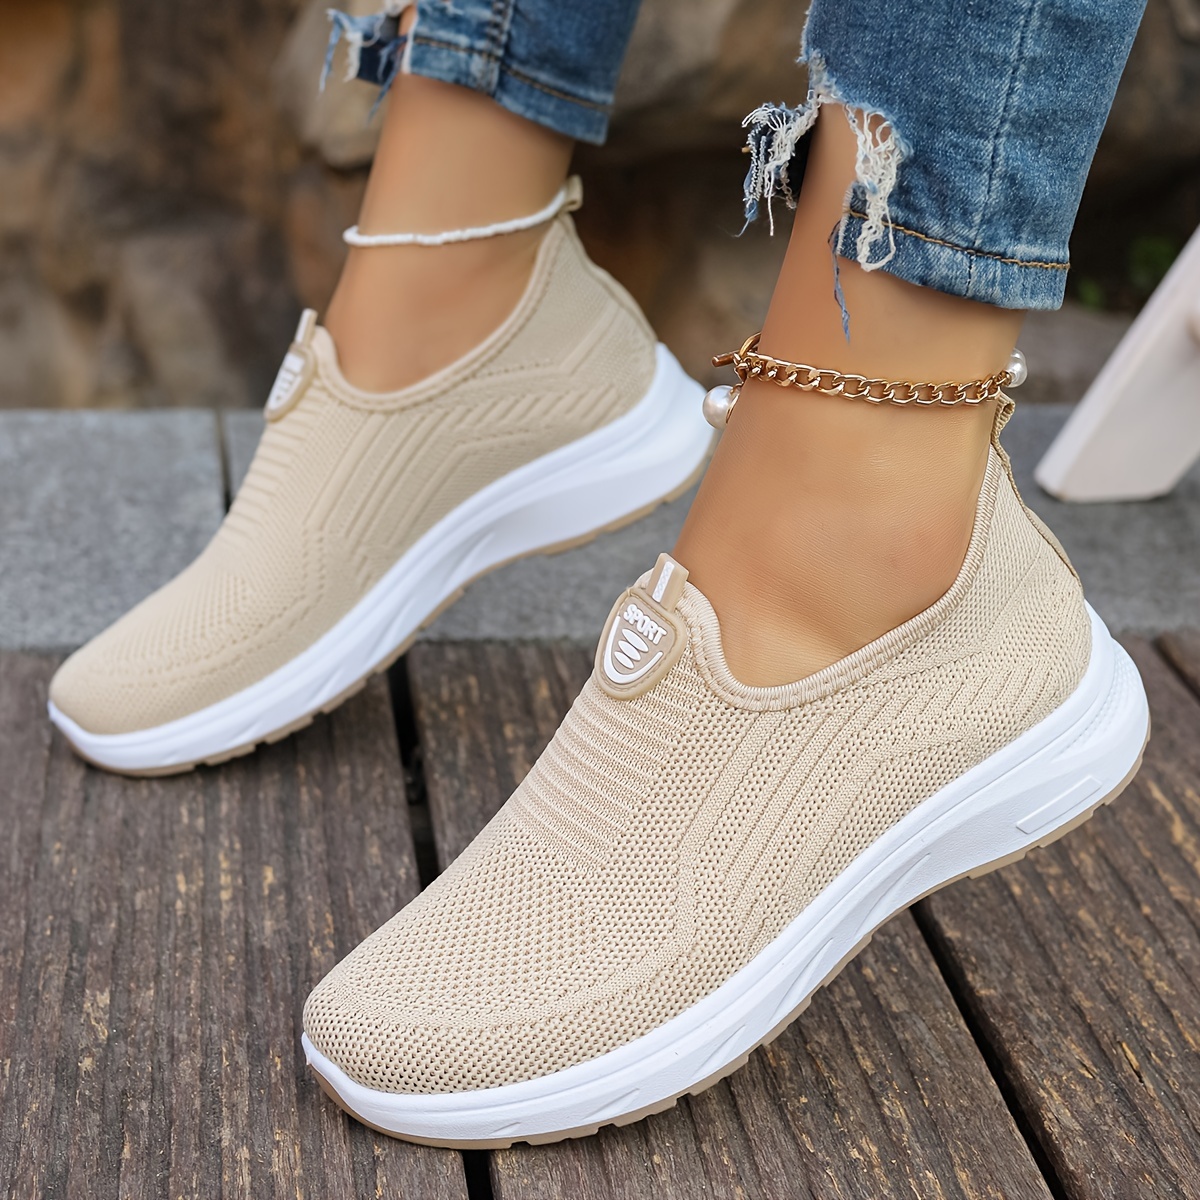 

Women's Breathable Knit Sneakers, Lightweight Slip-on Casual Athletic Shoes, Soft Sole Running Shoes